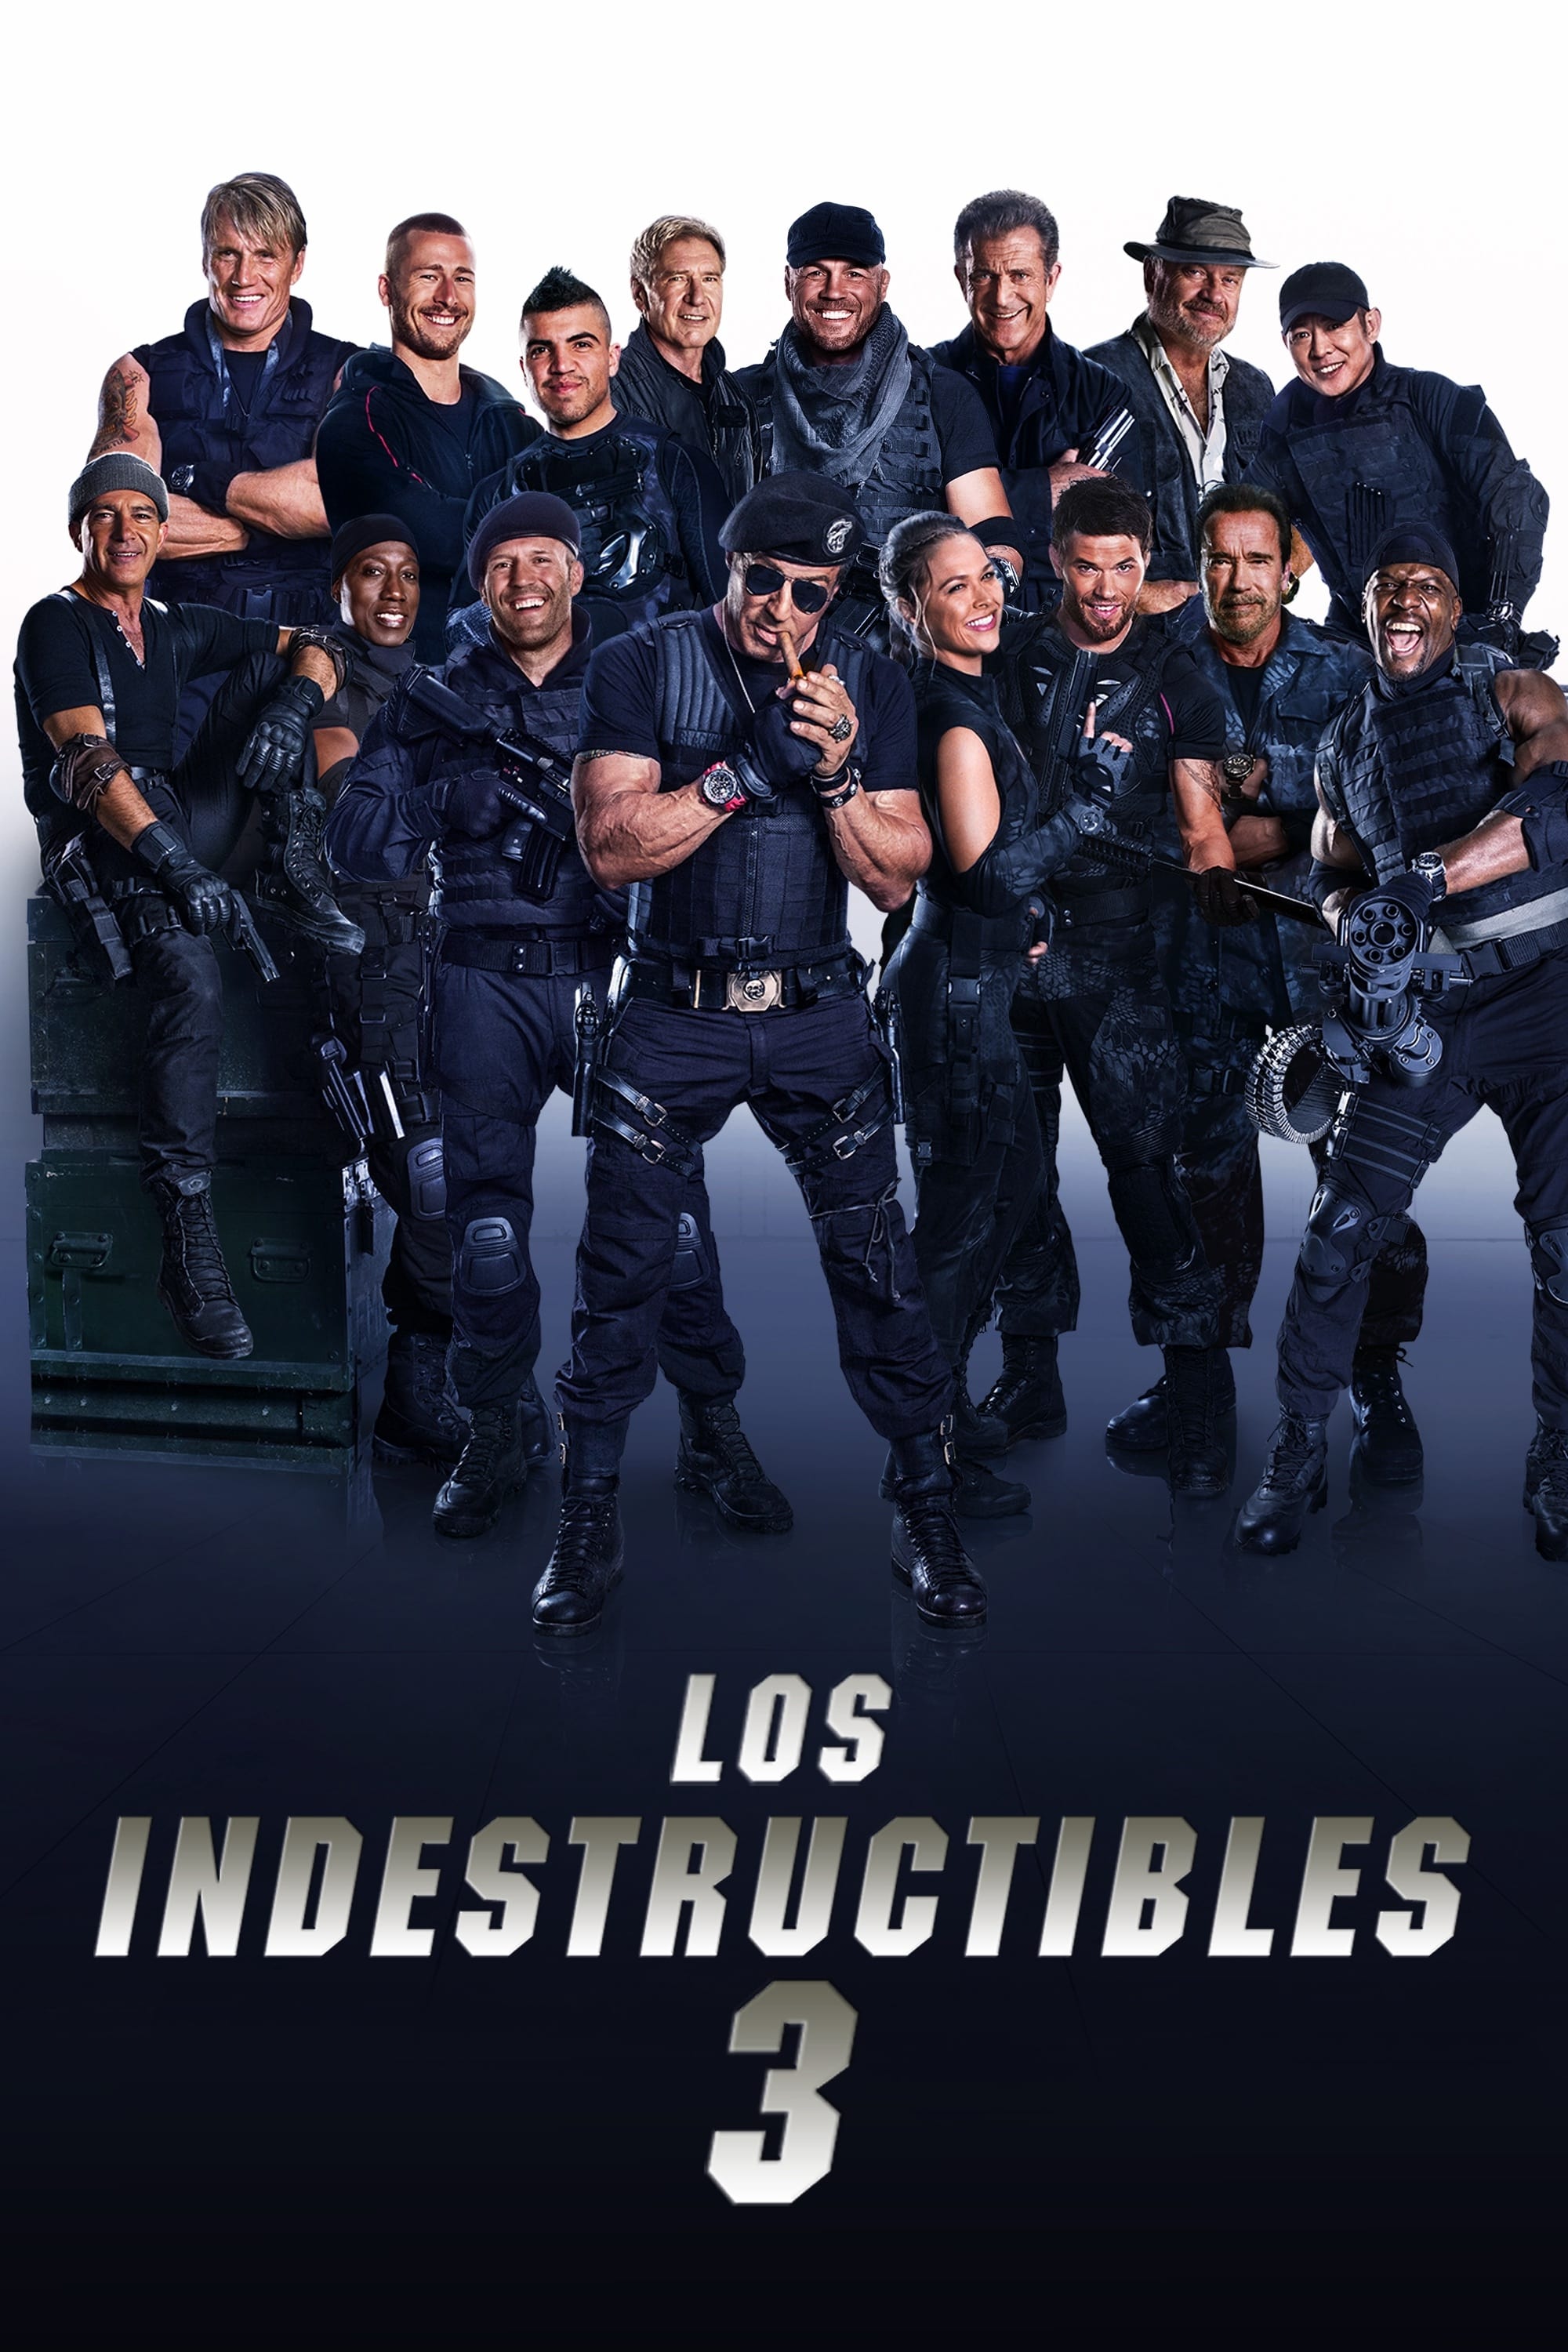 The Expendables 3 (2014) [Open Matte] WEB-DL 1080p Latino